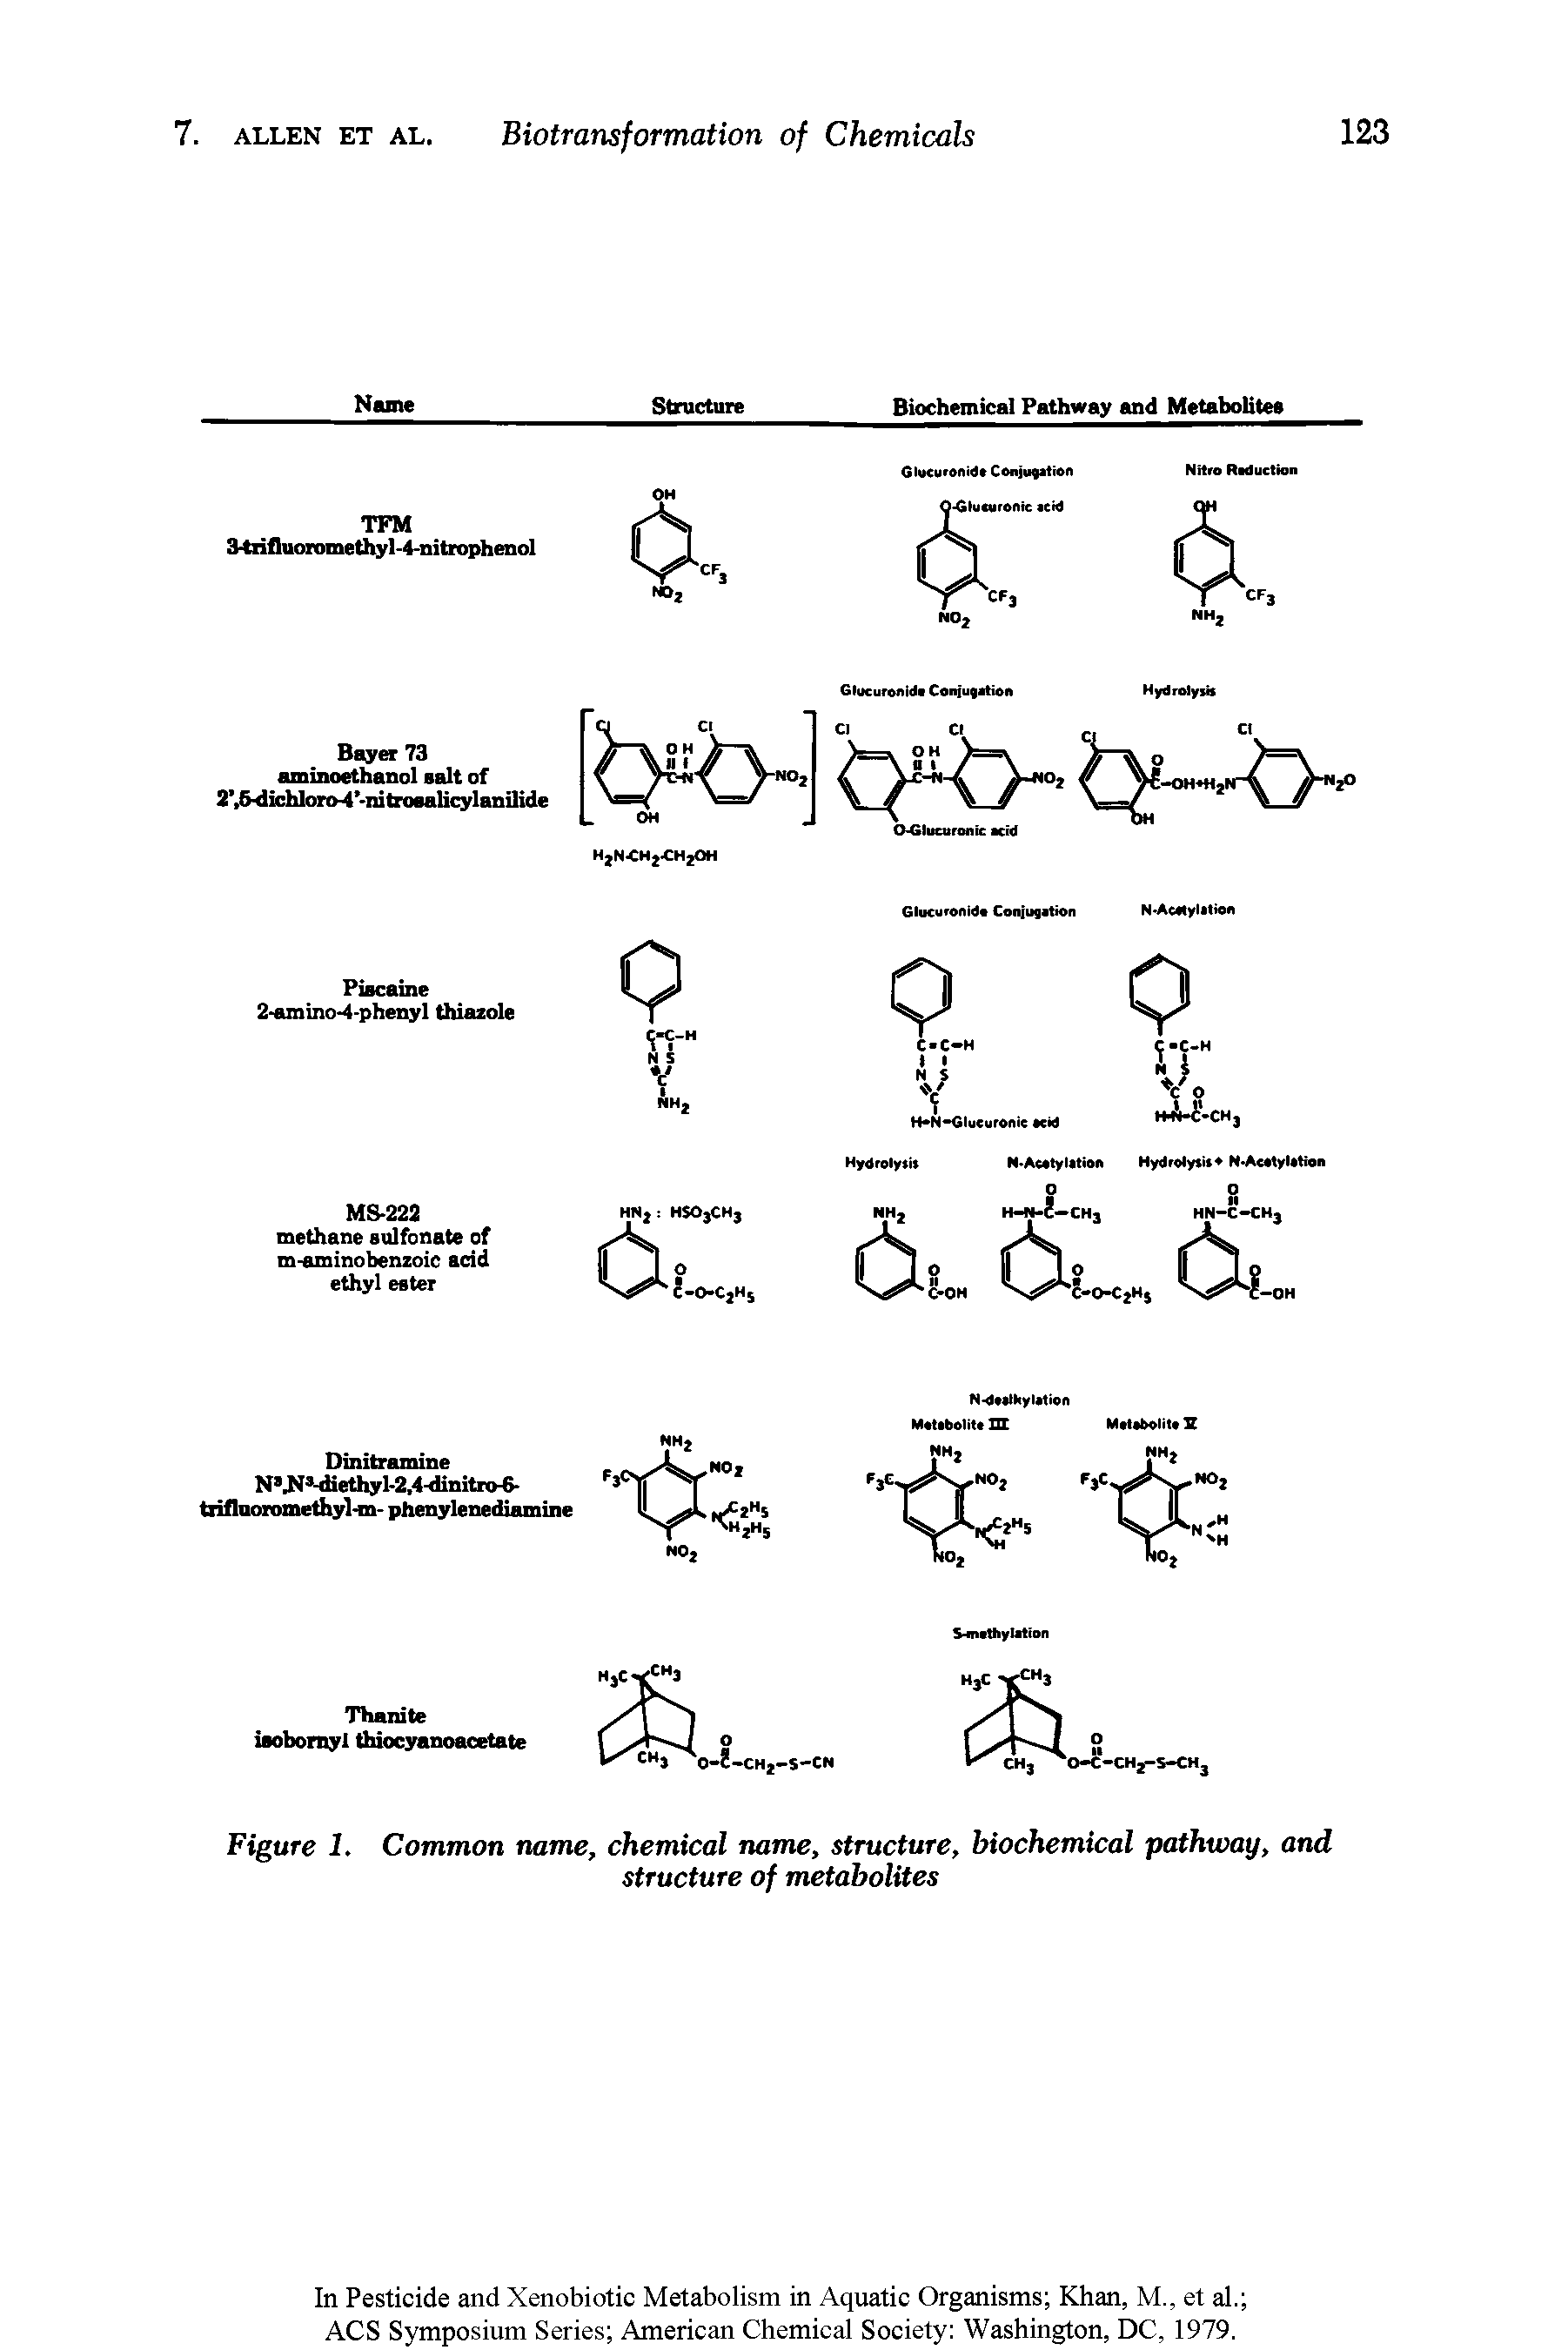 Figure 1. Common name, chemical name, structure, biochemical pathway, and...